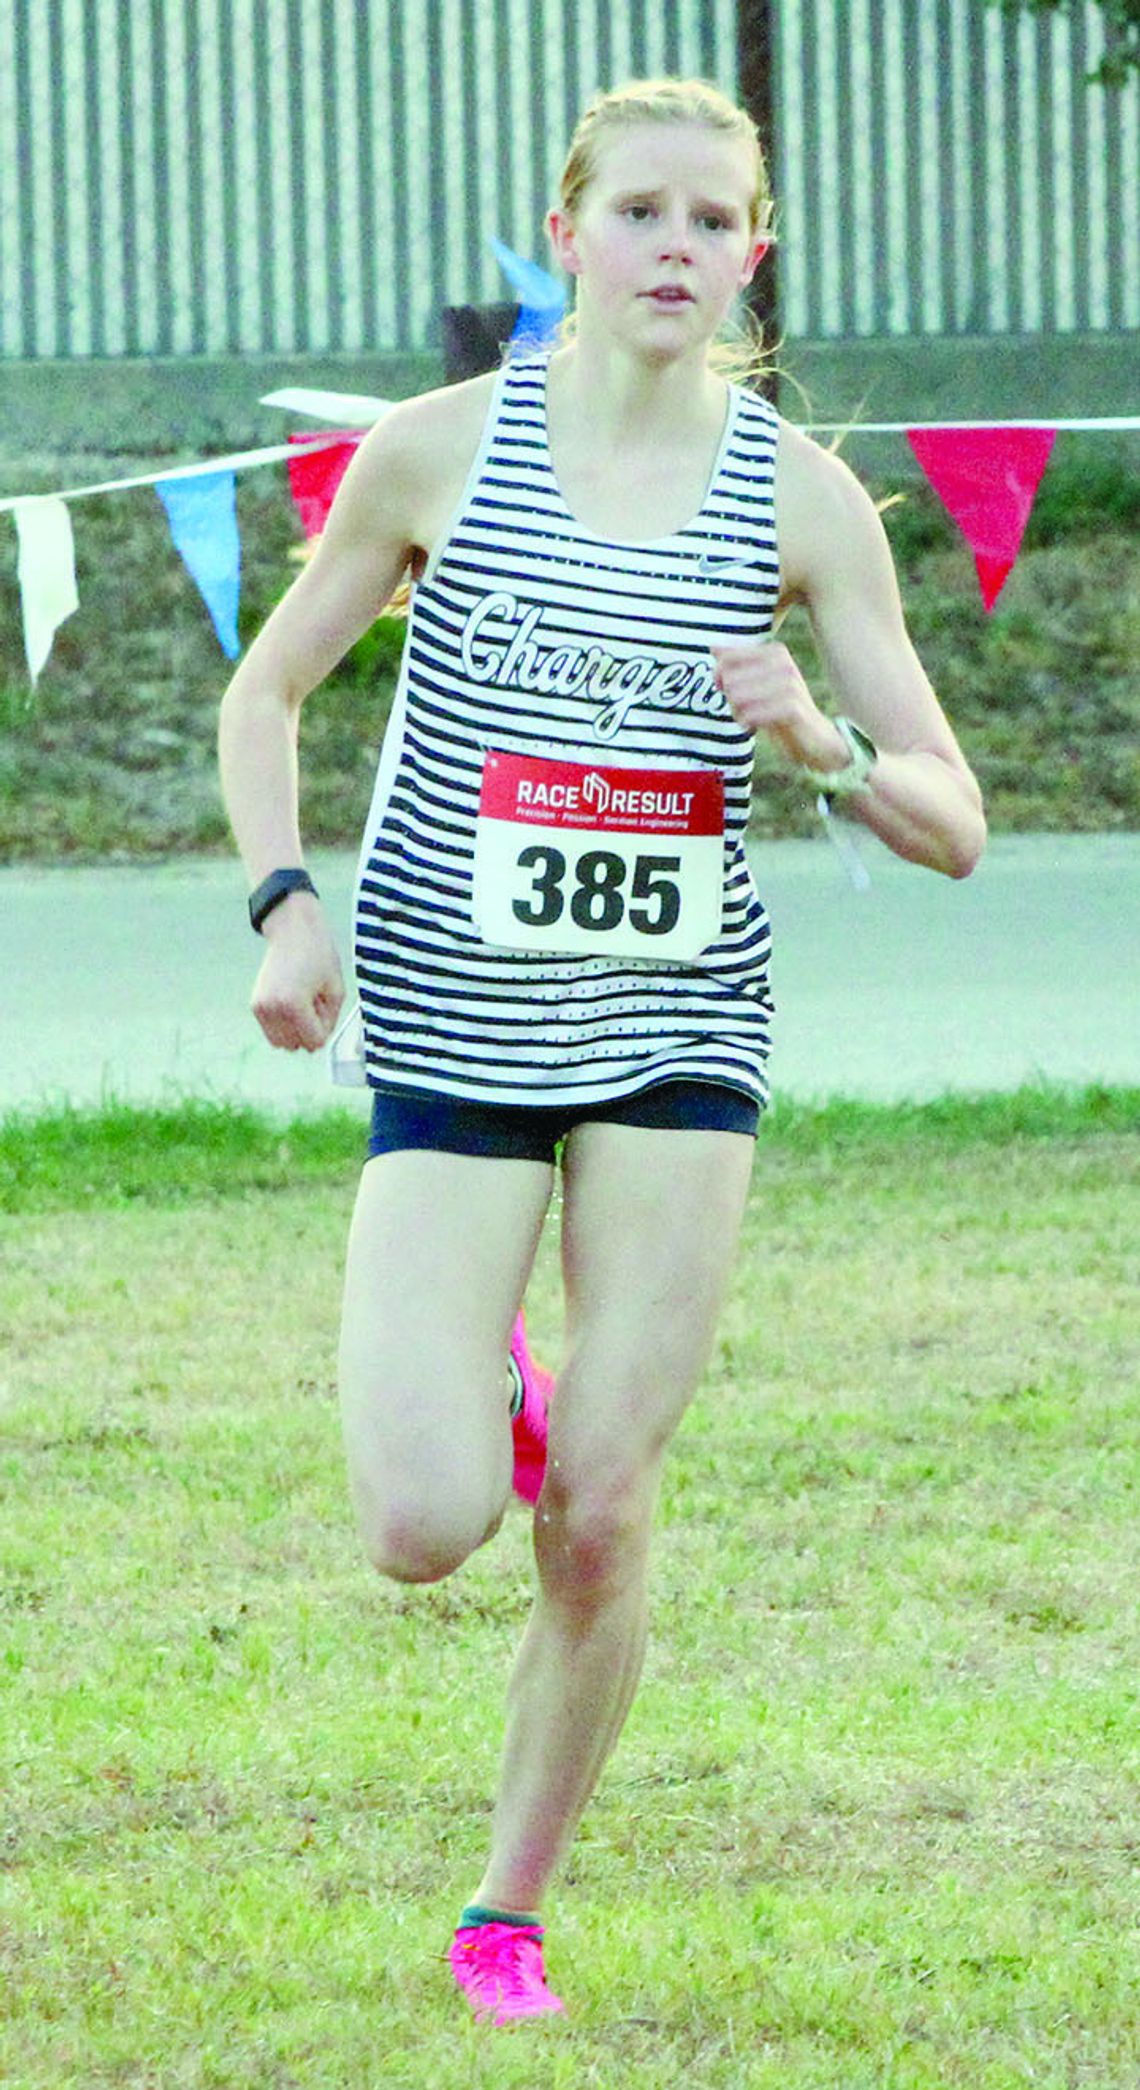 Leachman finishes first at Foot Locker XC South Region race to qualify for nationals